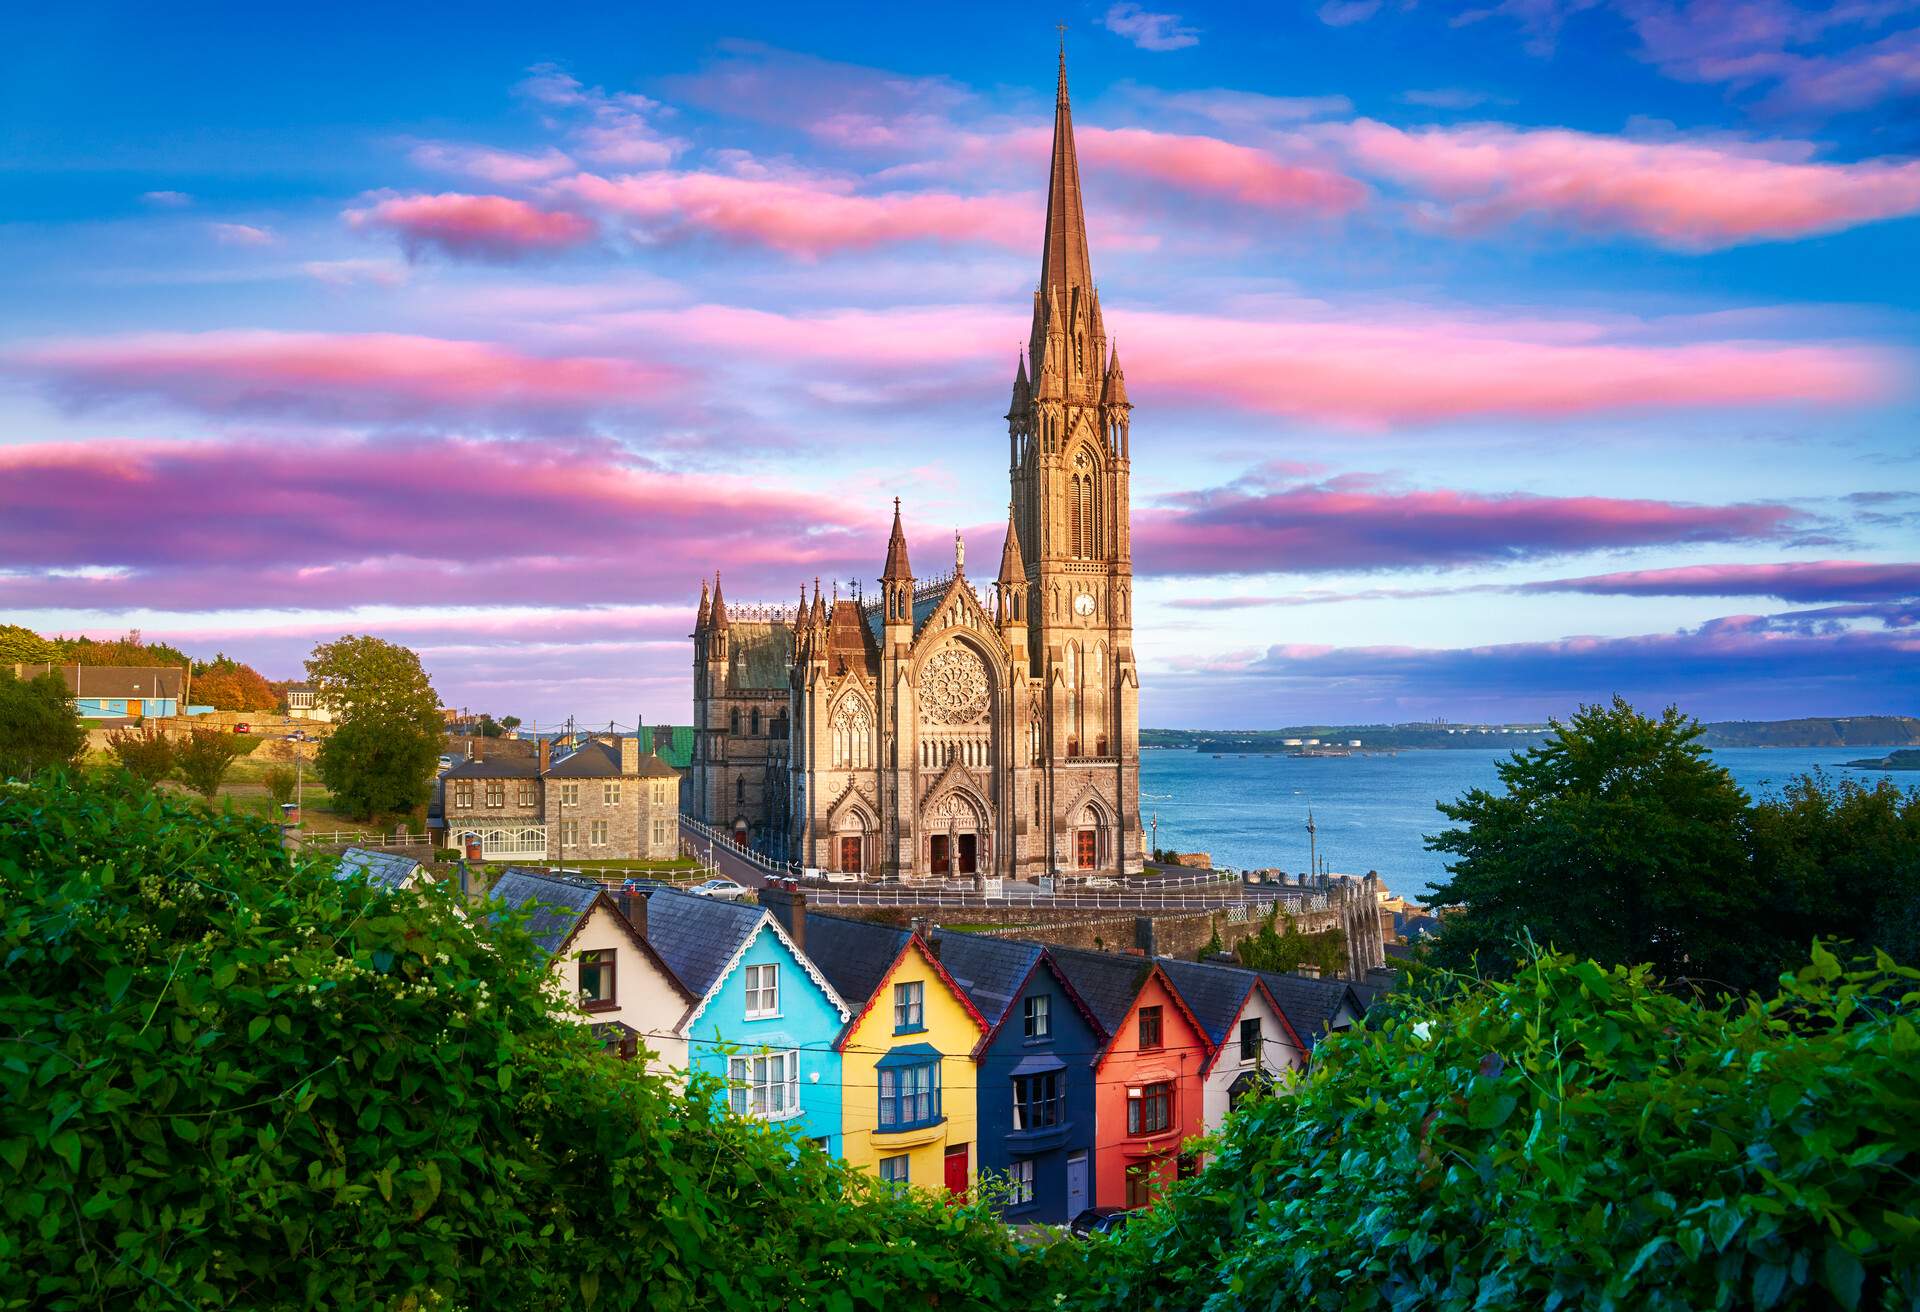 St. Colman's Cathedral in Cobh is a harbor town in County Cork, Ireland. Formerly known as Queenstown, it remains one of the major Irish ports and popular with tourists and travel. Below the Cathedral colorful houses line the foreground - the appropriate named Deck of Cards houses, 23 identical houses built on 23 levels and each one differs in color from the other. A dramatic sunset bathes the cathedral and skyline in dramatic light. Largest file is of very high resolution and detail, photographed with latest state of the art camera.